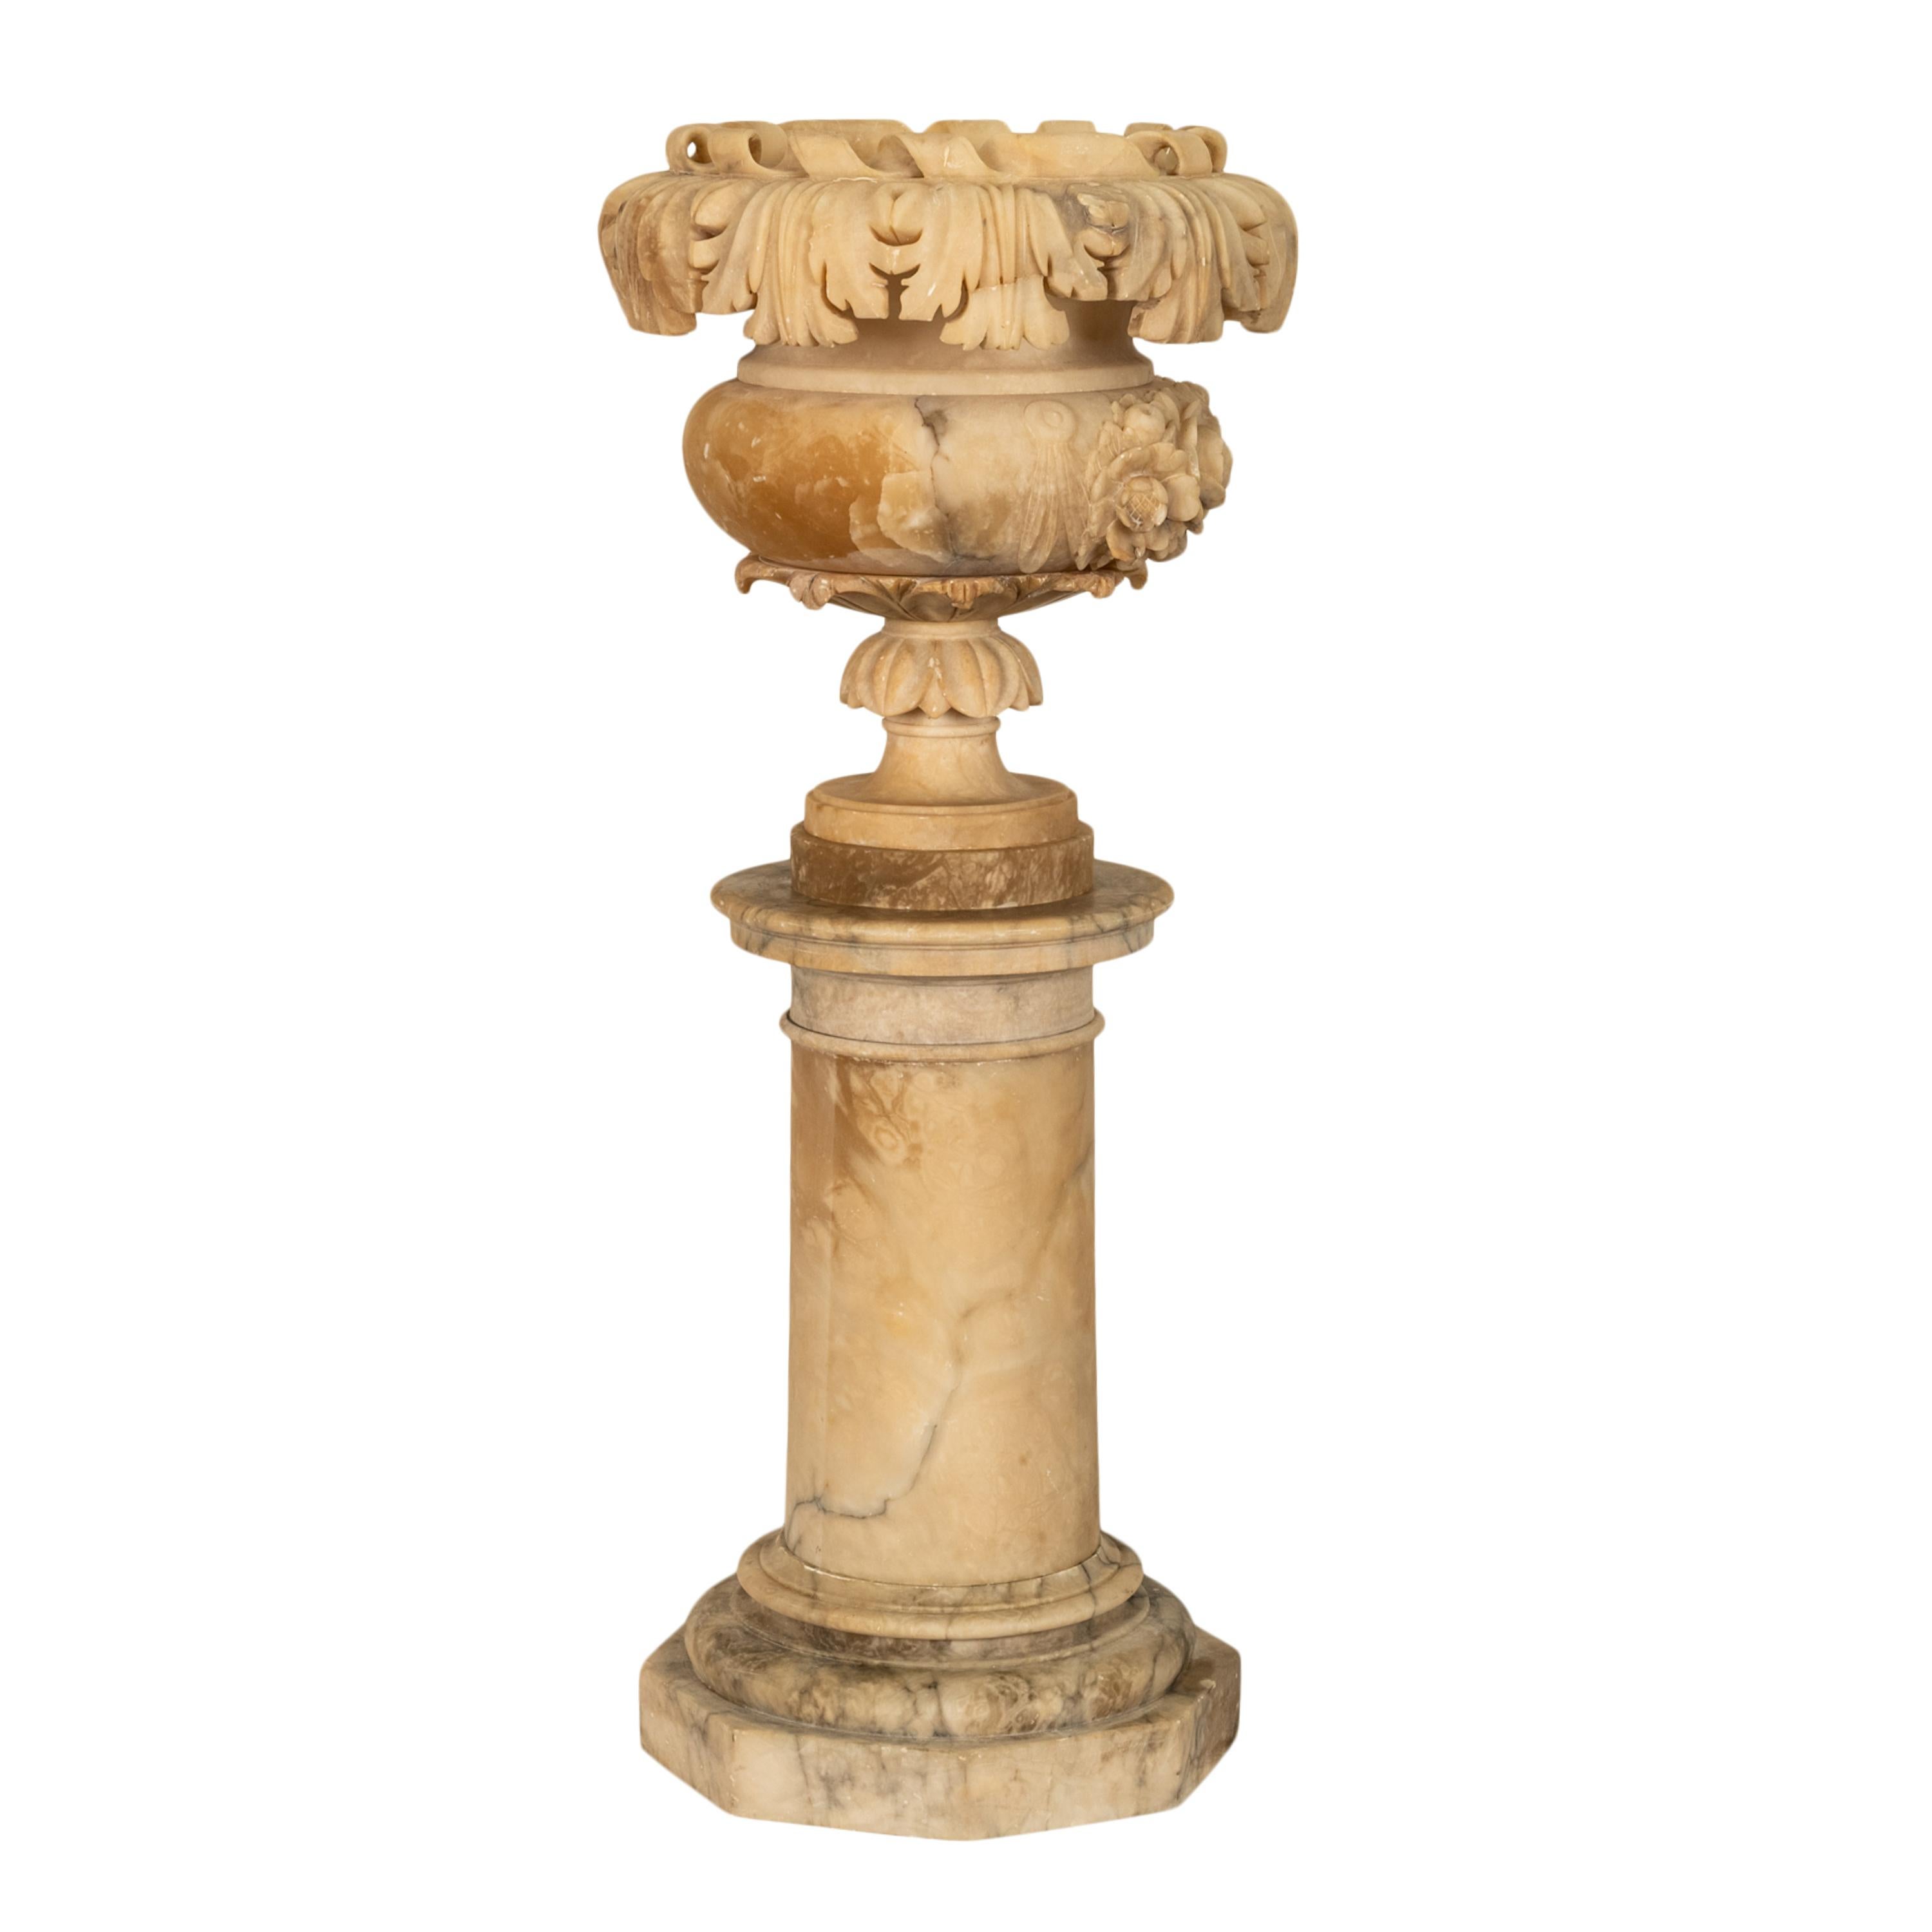 Antique 19th Century Italian Carved Alabaster Neoclassical Urn on Pedestal 1850 For Sale 1